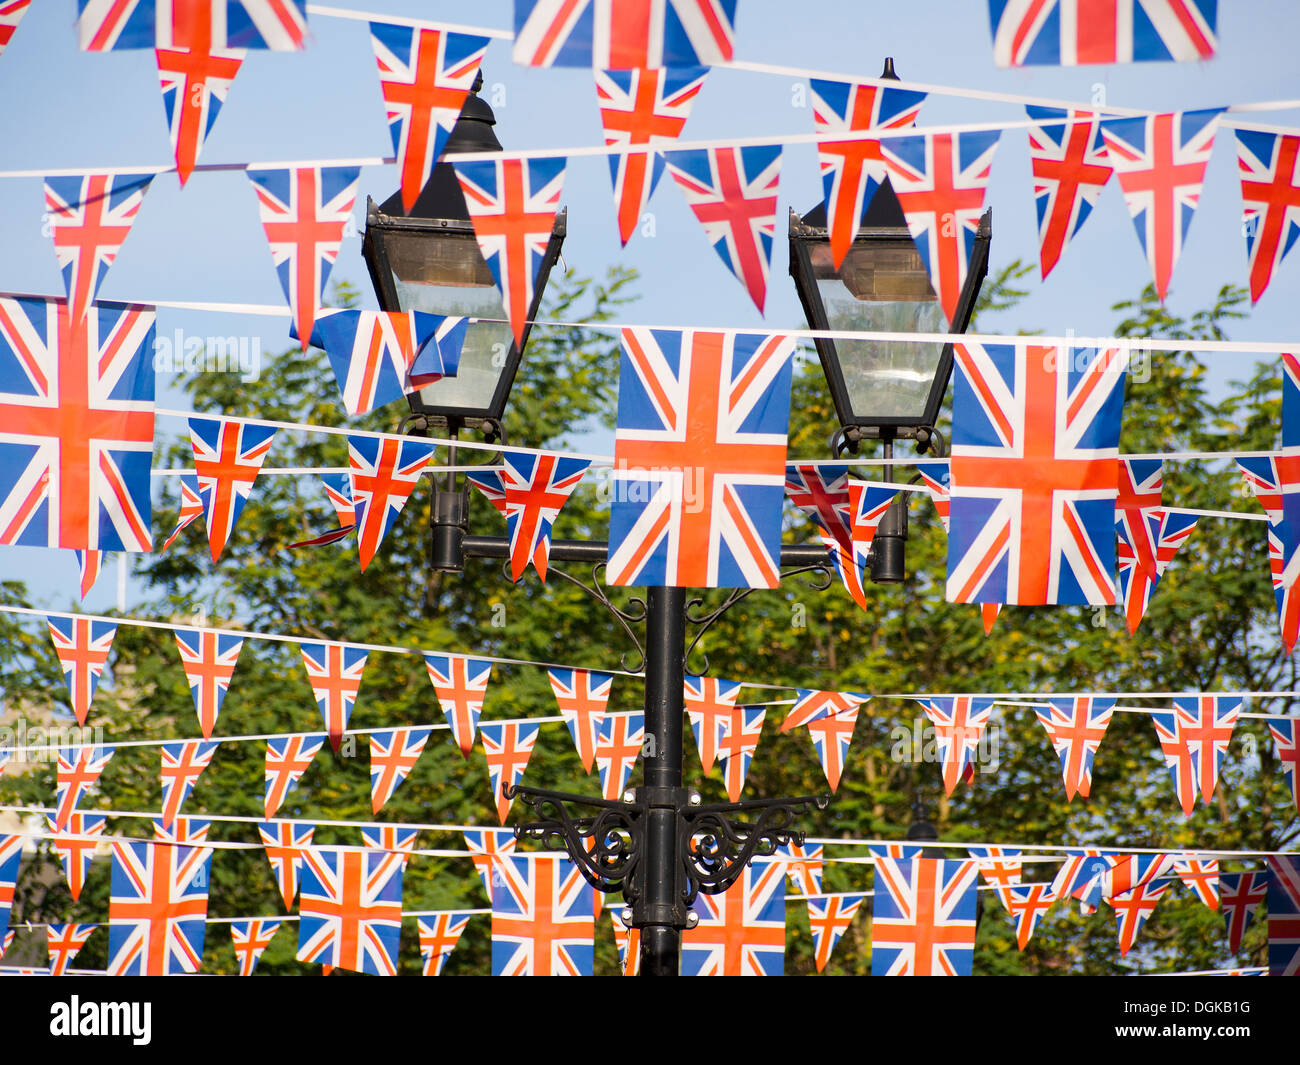 Union flags with bunting and lanterns decorate St. Ebbes Street in Oxford. Stock Photo